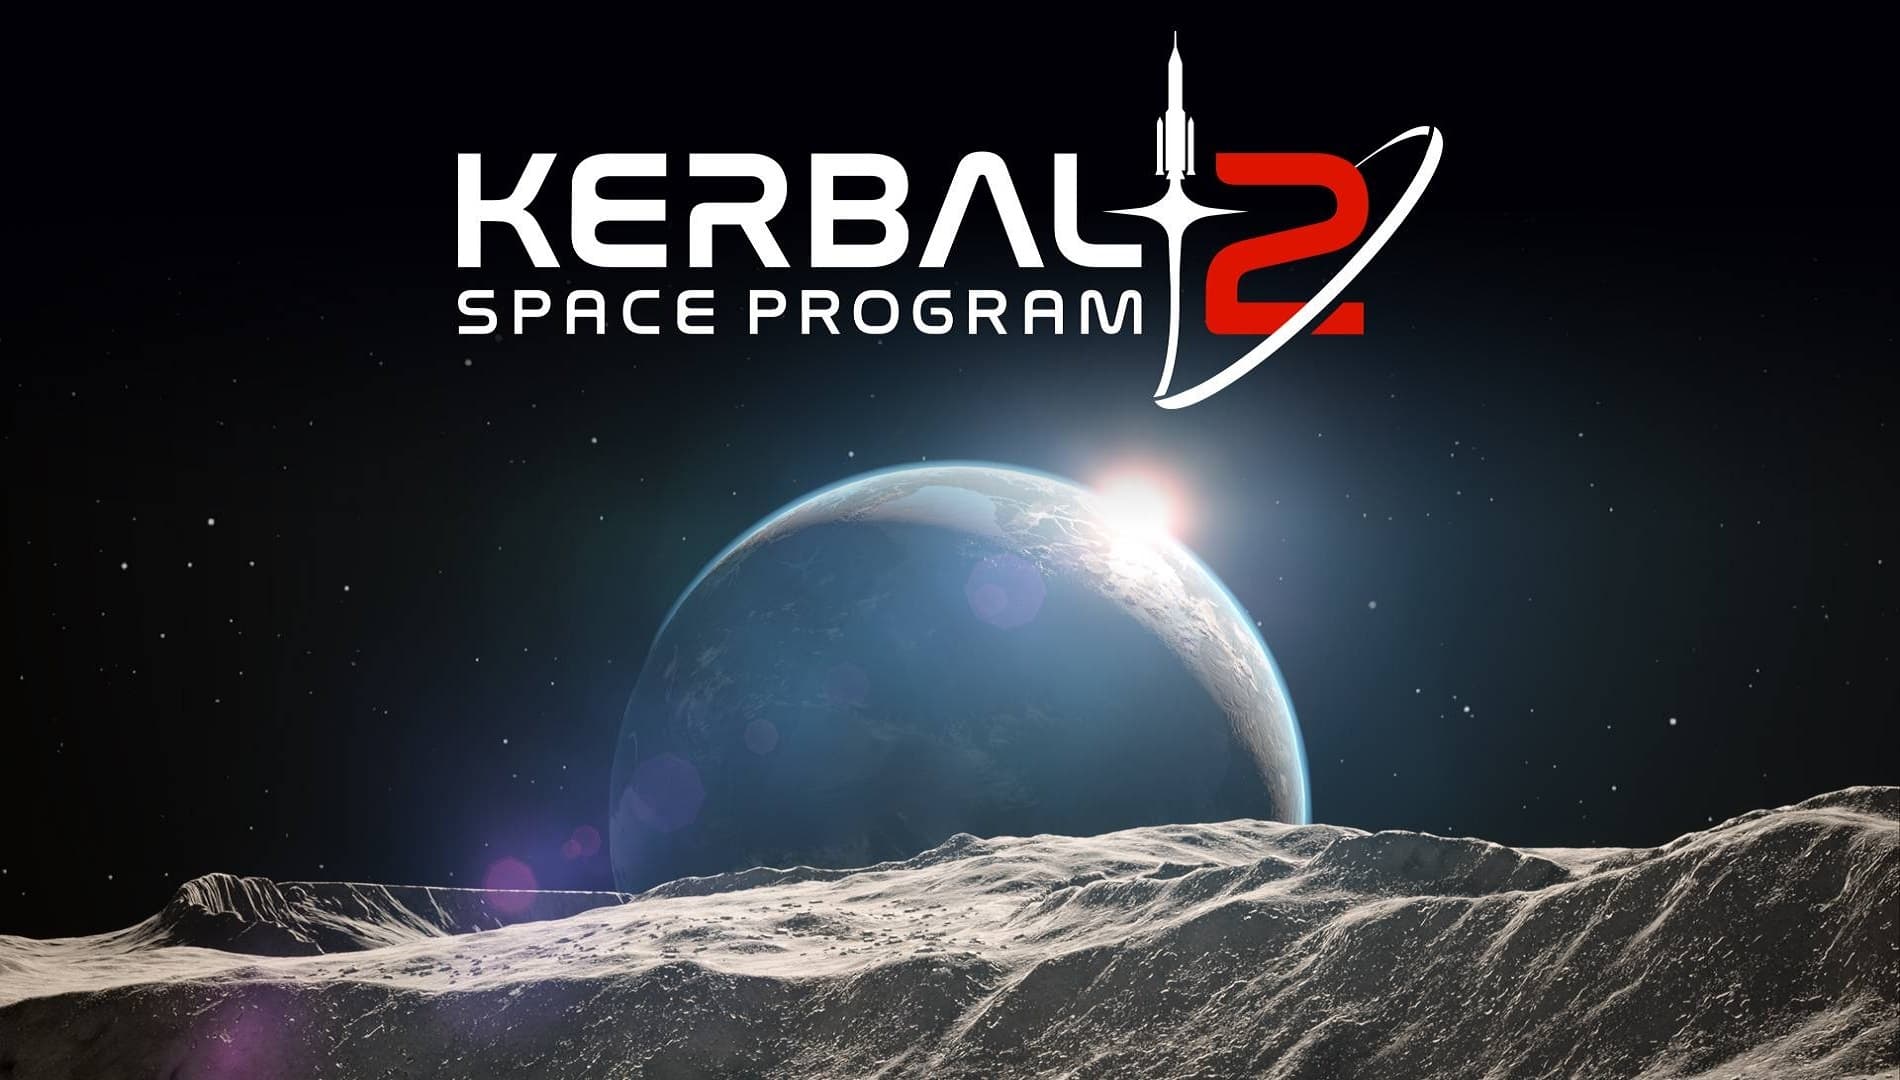   Kerbal Space 2 Program Tell Us How To Create A Space Program |  Xbox One

